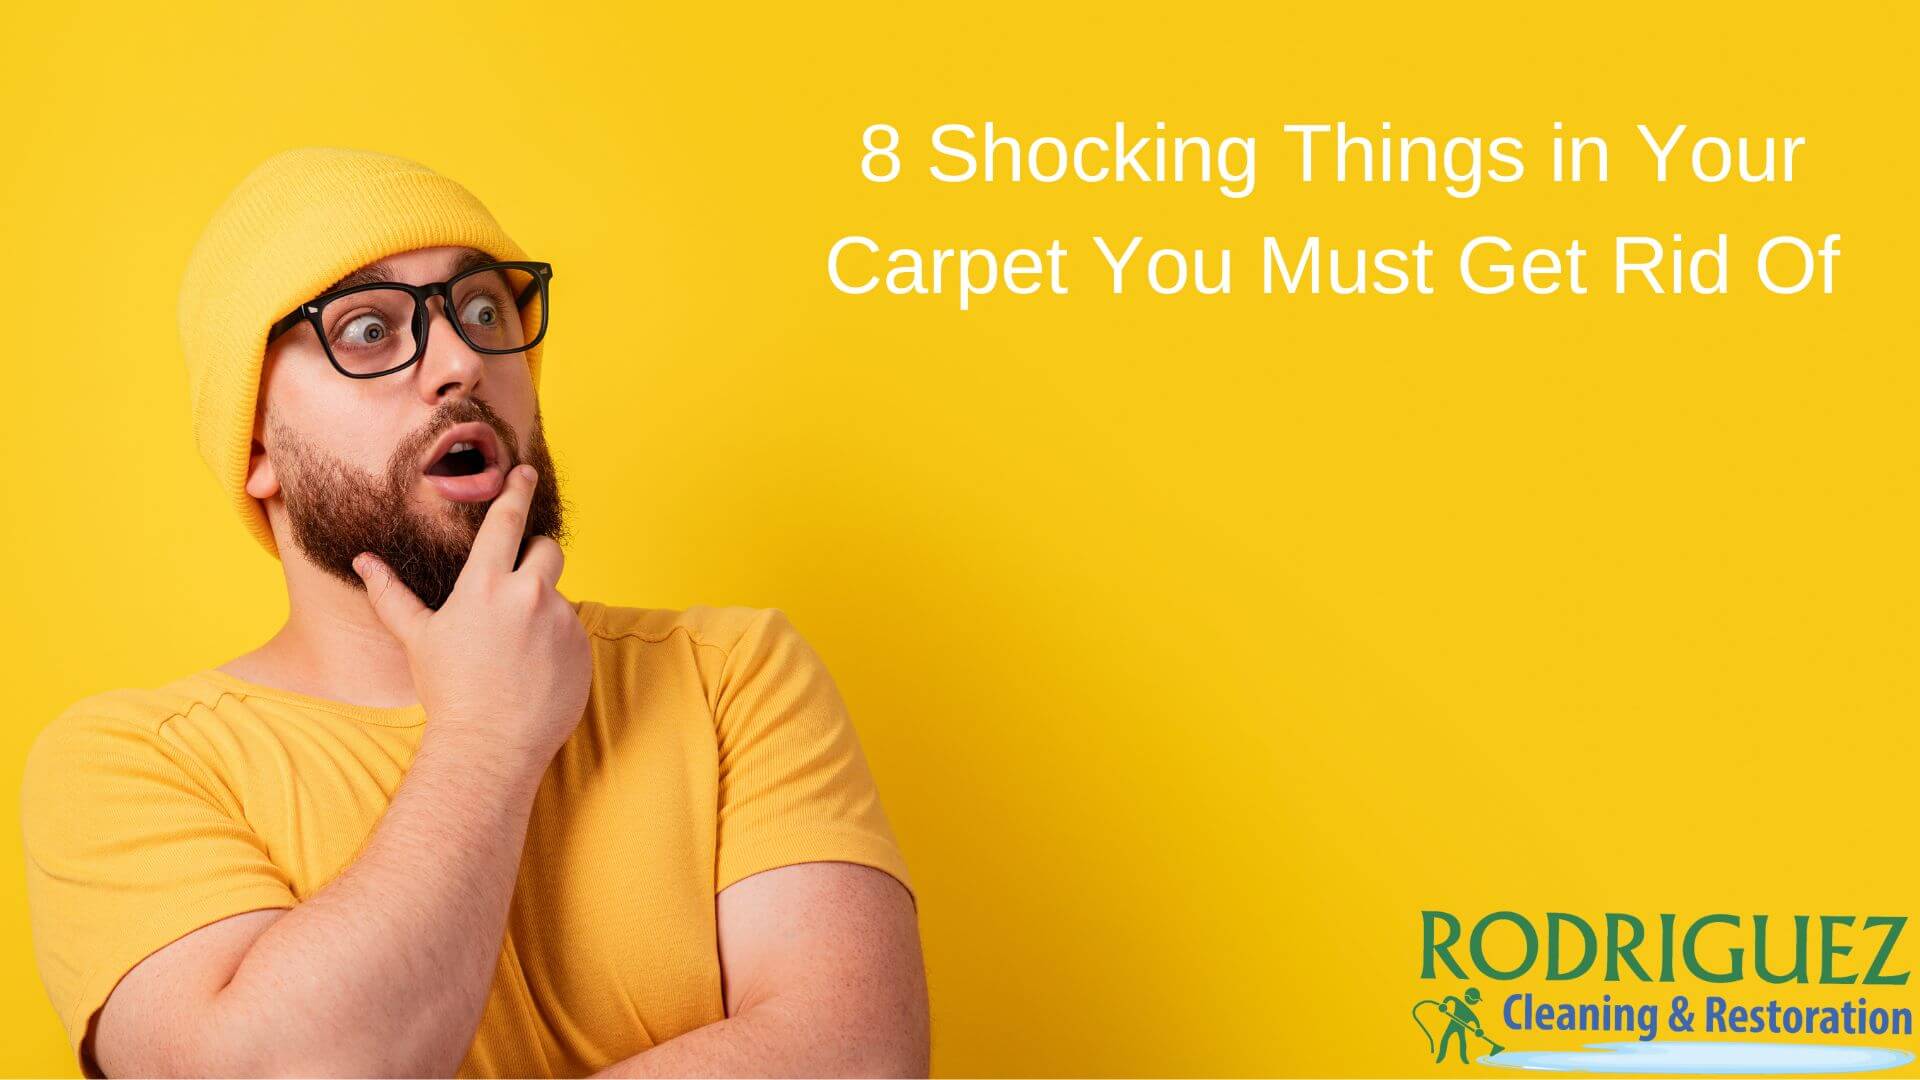 Carpets are often the last thing we think about when it comes to cleaning and maintenance, but they can be breeding grounds for dirt, dust, and other yucky things. While carpeting may seem harmless, some shocking things are lurking in your carpets that you must get rid of. Here are three of the most common and surprising culprits that can be present in your carpet: Louisville KY